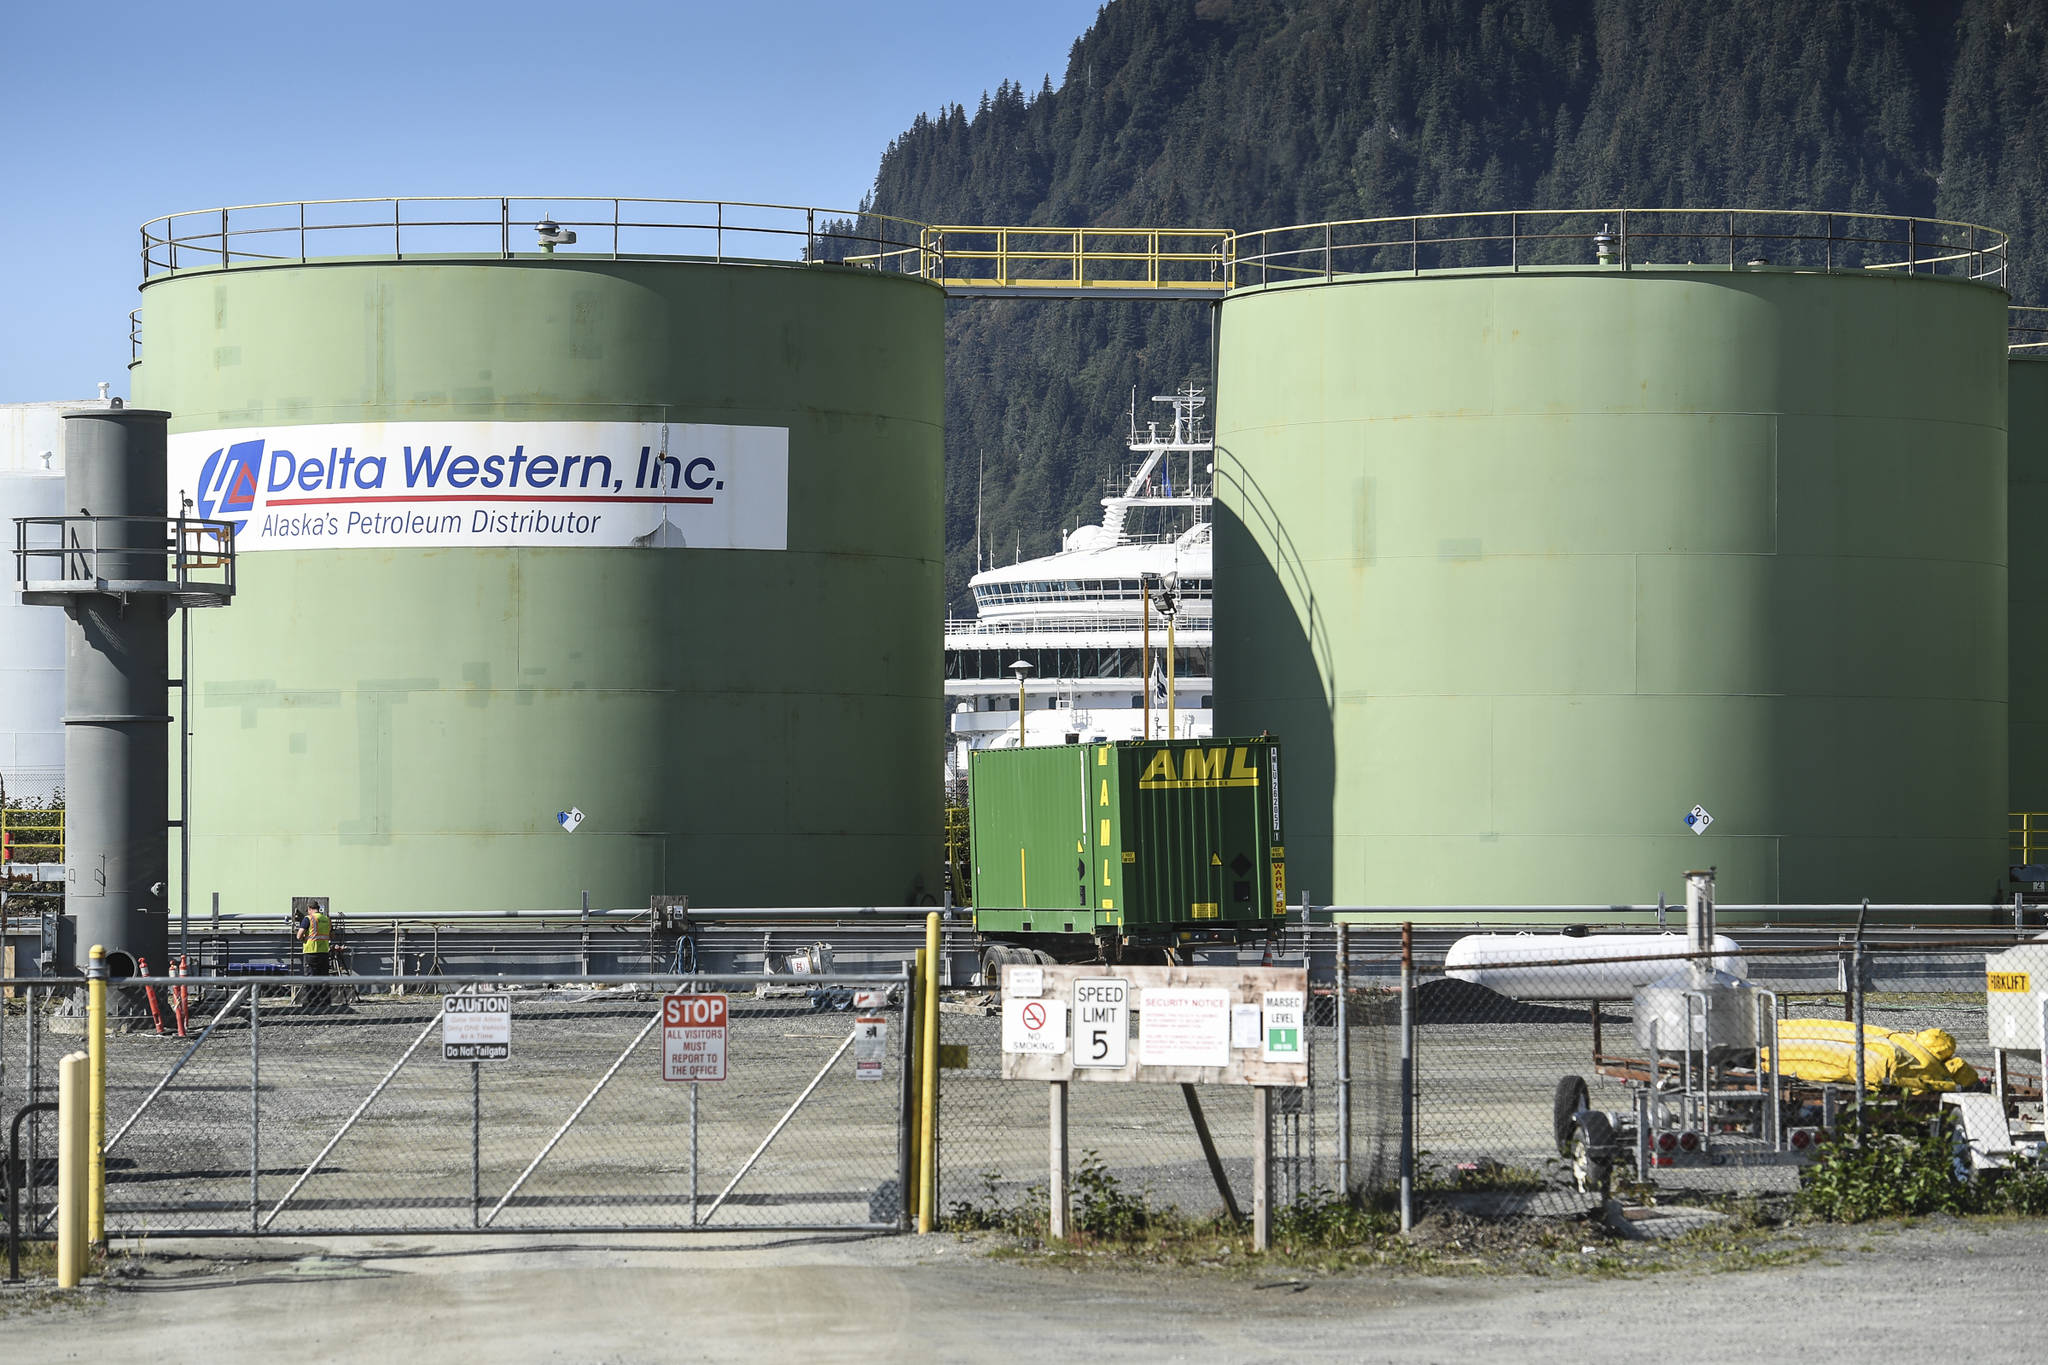 The Delta Western, Inc. facility on Mt. Roberts Street as pictured in this Friday, Sept. 6, 2019, photo was the site of an alleged Clean Air Act violation, according to the Environmental Protection Agency. (Michael Penn | Juneau Empire)